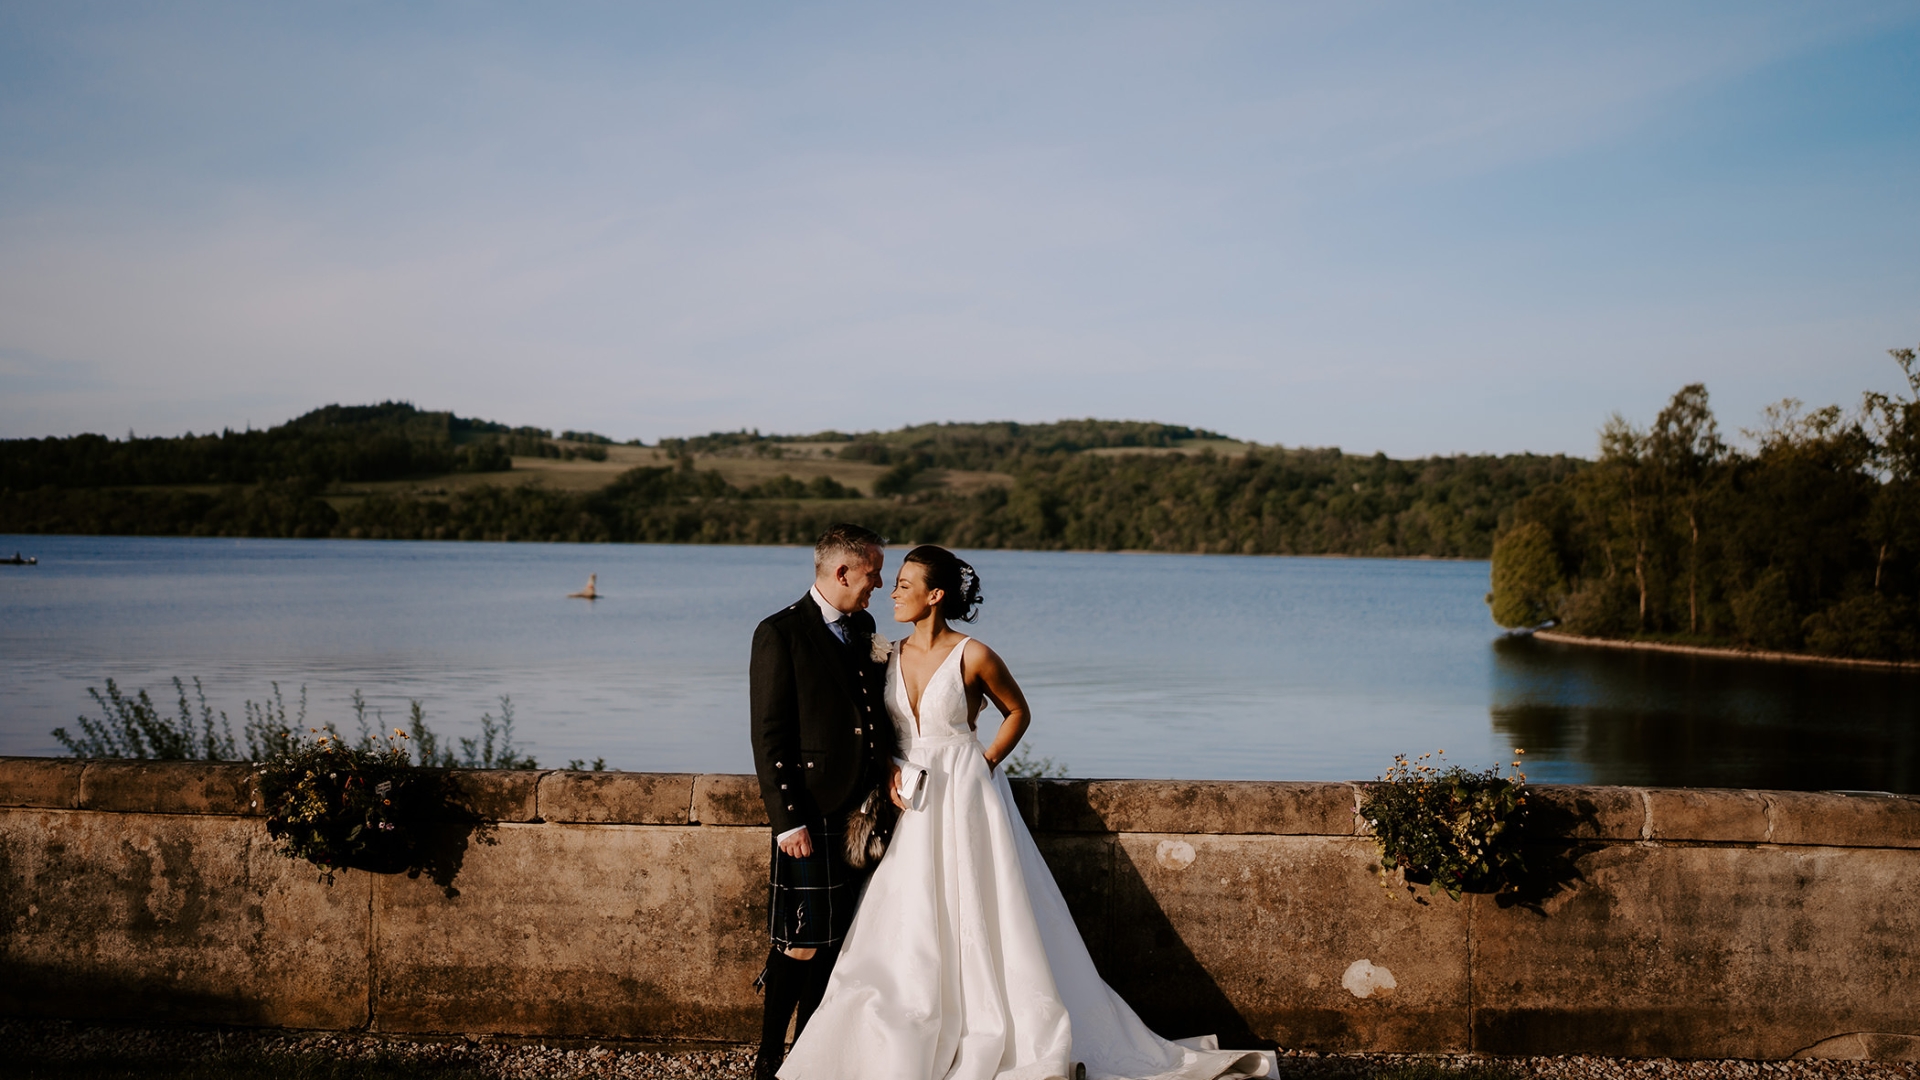 A bridge and groom gazing into each others eyes while standing in front of a massive lake